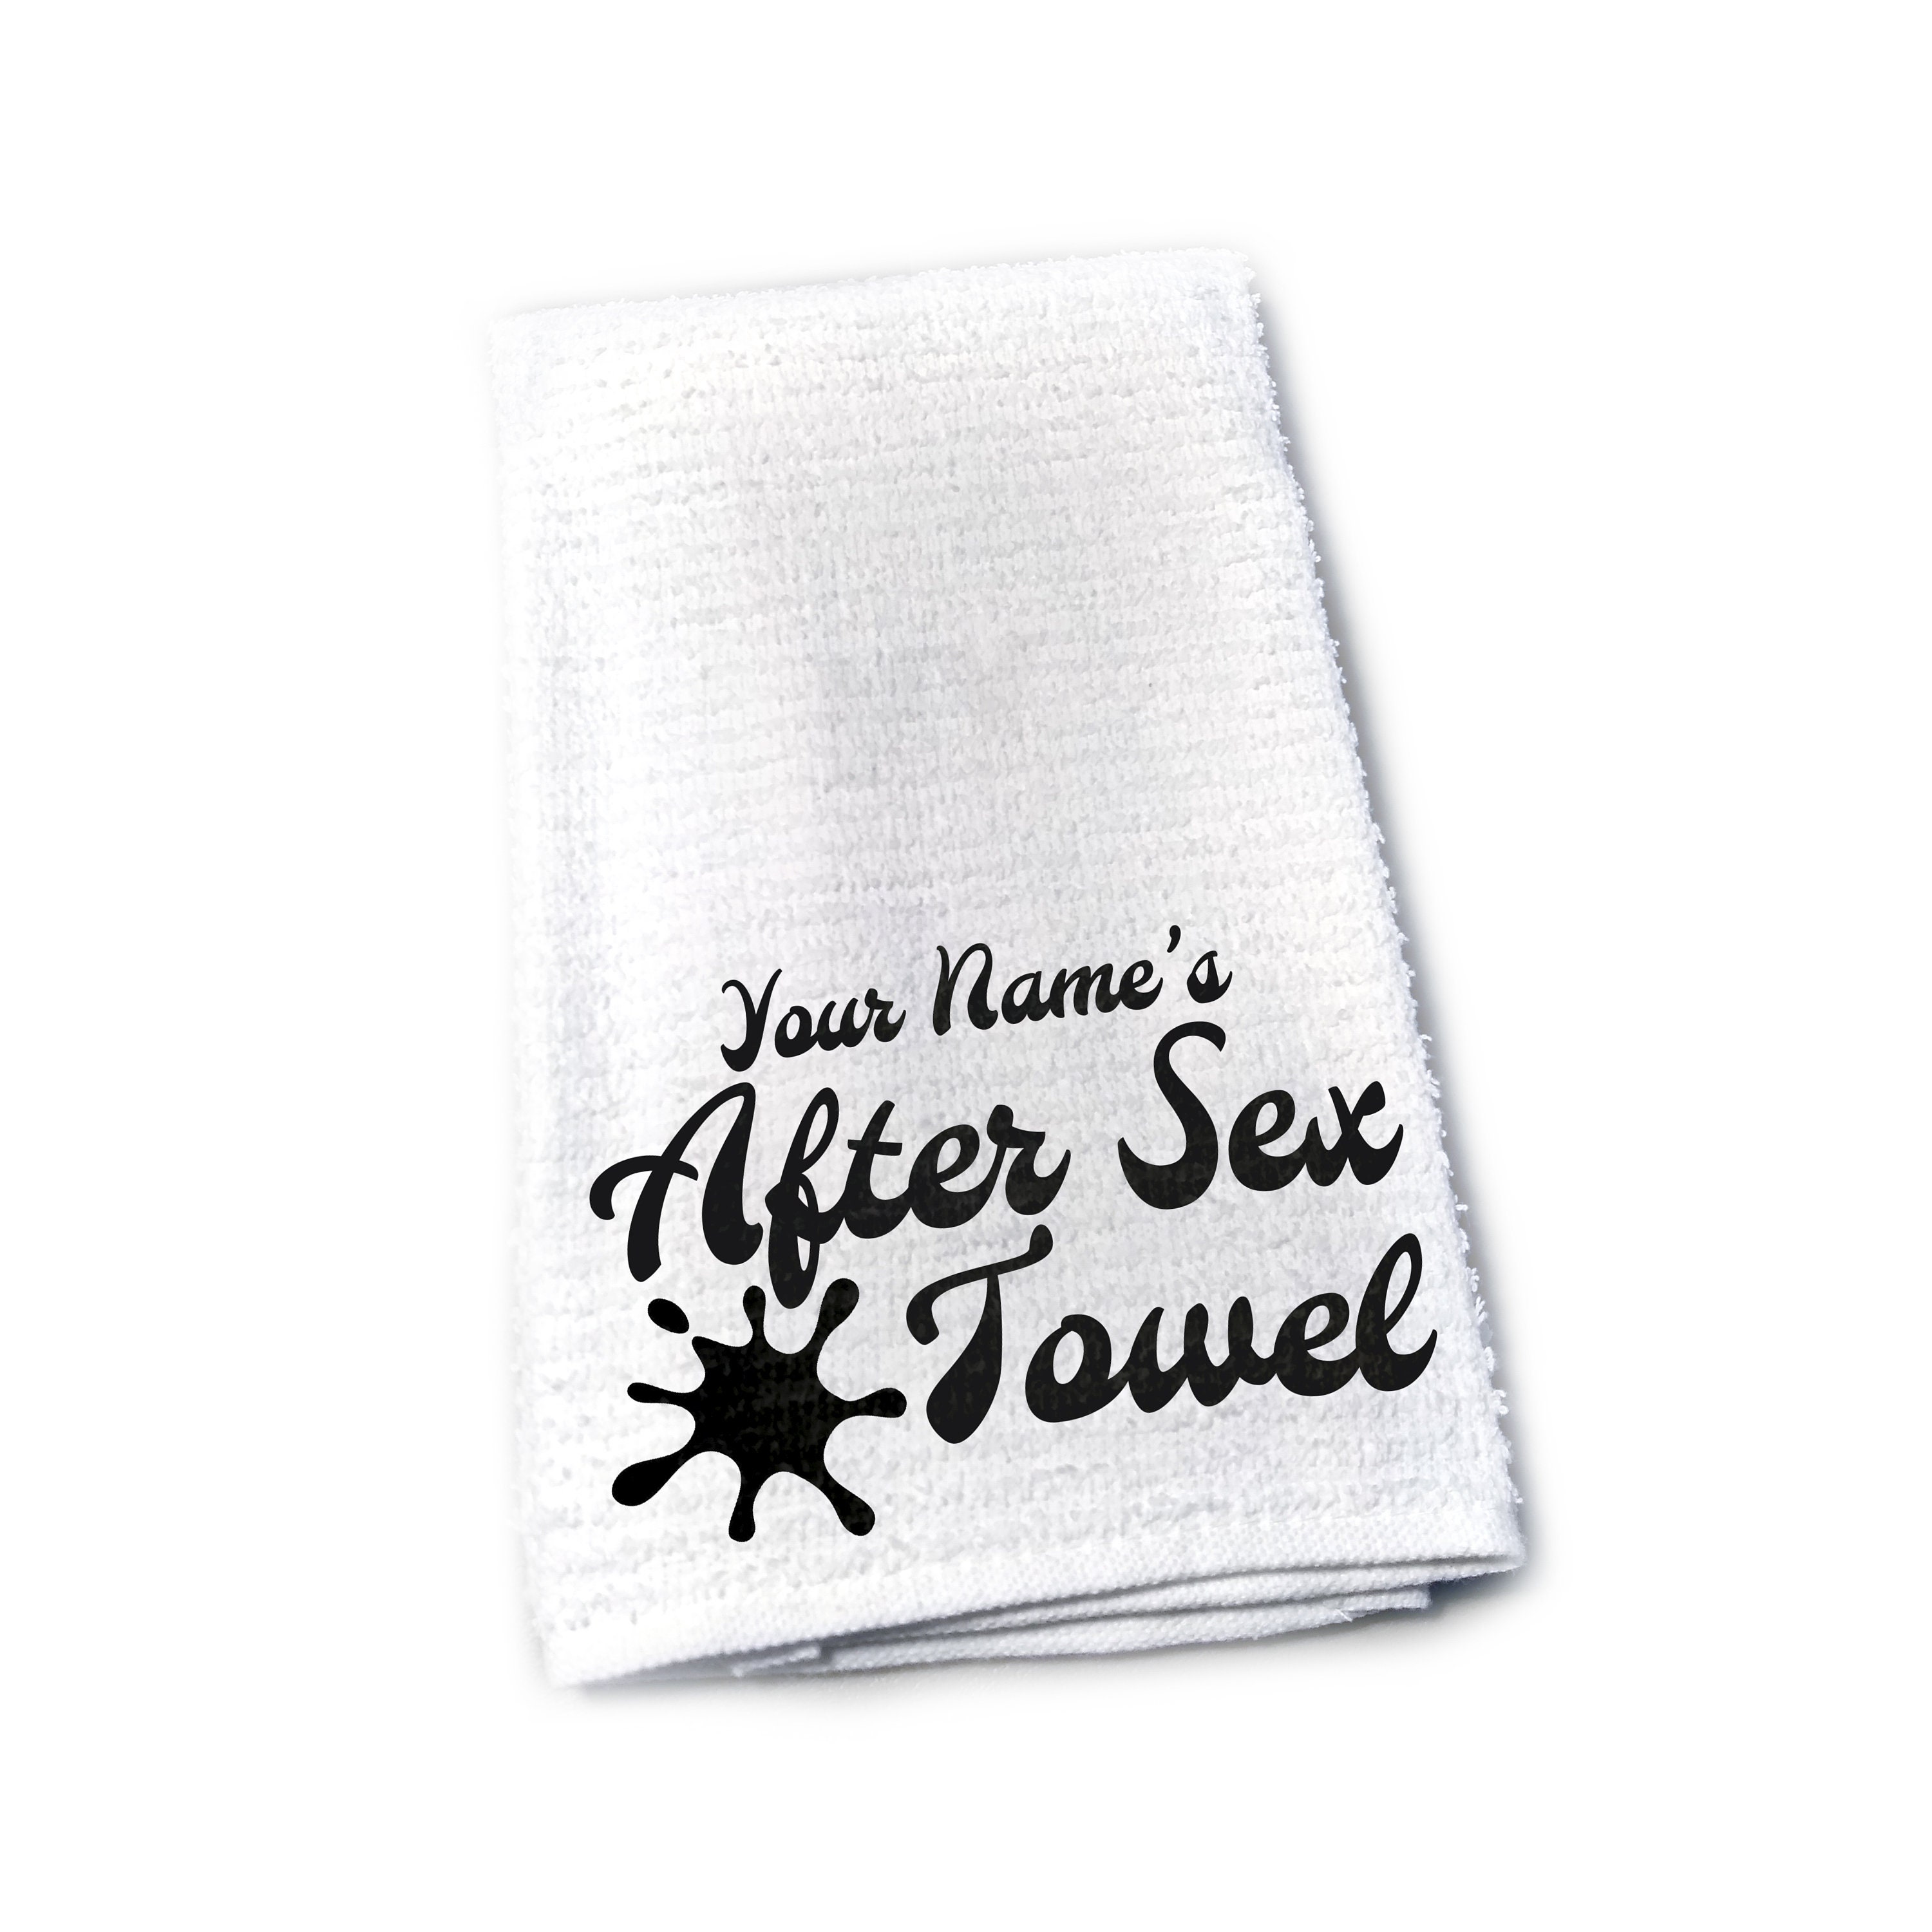 Personalized After Sex Towel Custom Printed With Your Name